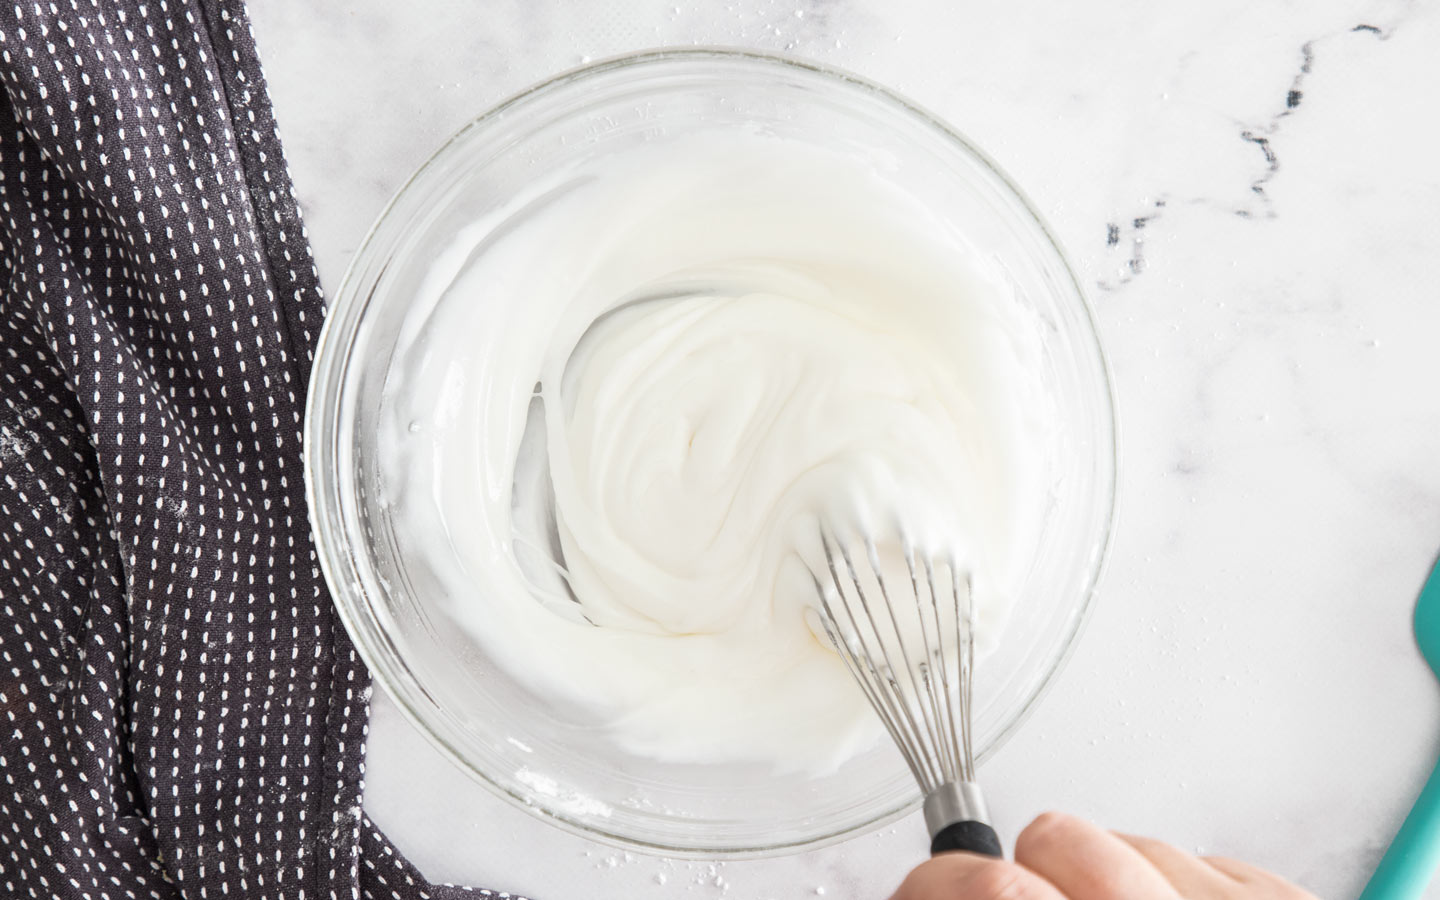 Whisking the icing in a bowl.